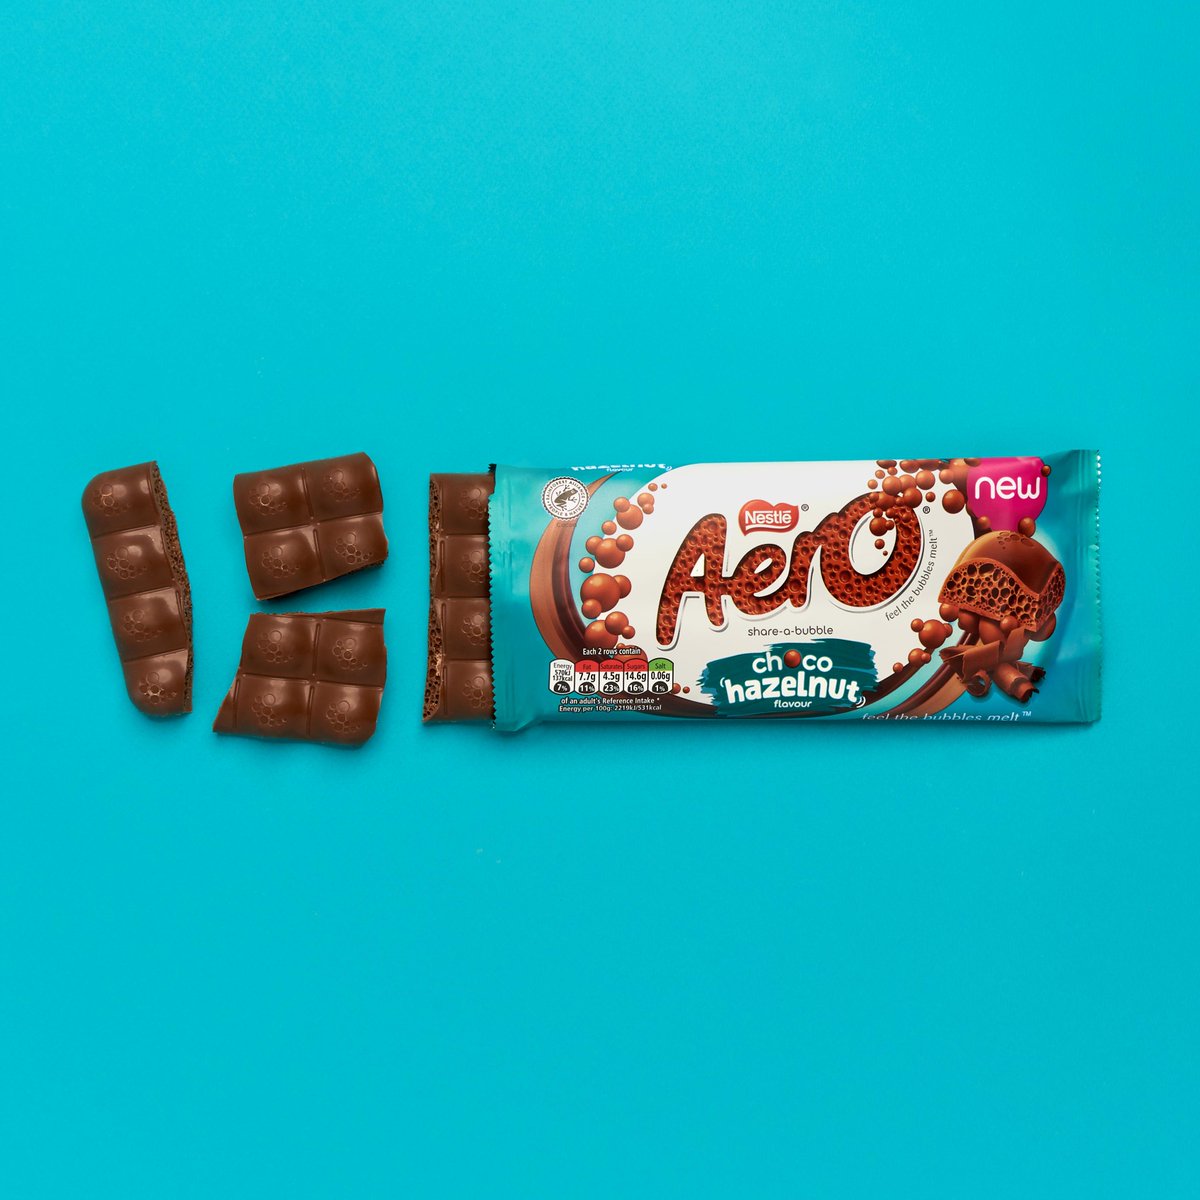 Introducing #new Aero choco-hazelnut! Bringing together our signature melt in your mouth bubbles, and the nutty flavour of hazelnut, we’ve created a bubbly symphony that we know you’ll love. Available now nationwide at supermarkets and convenience stores near you.